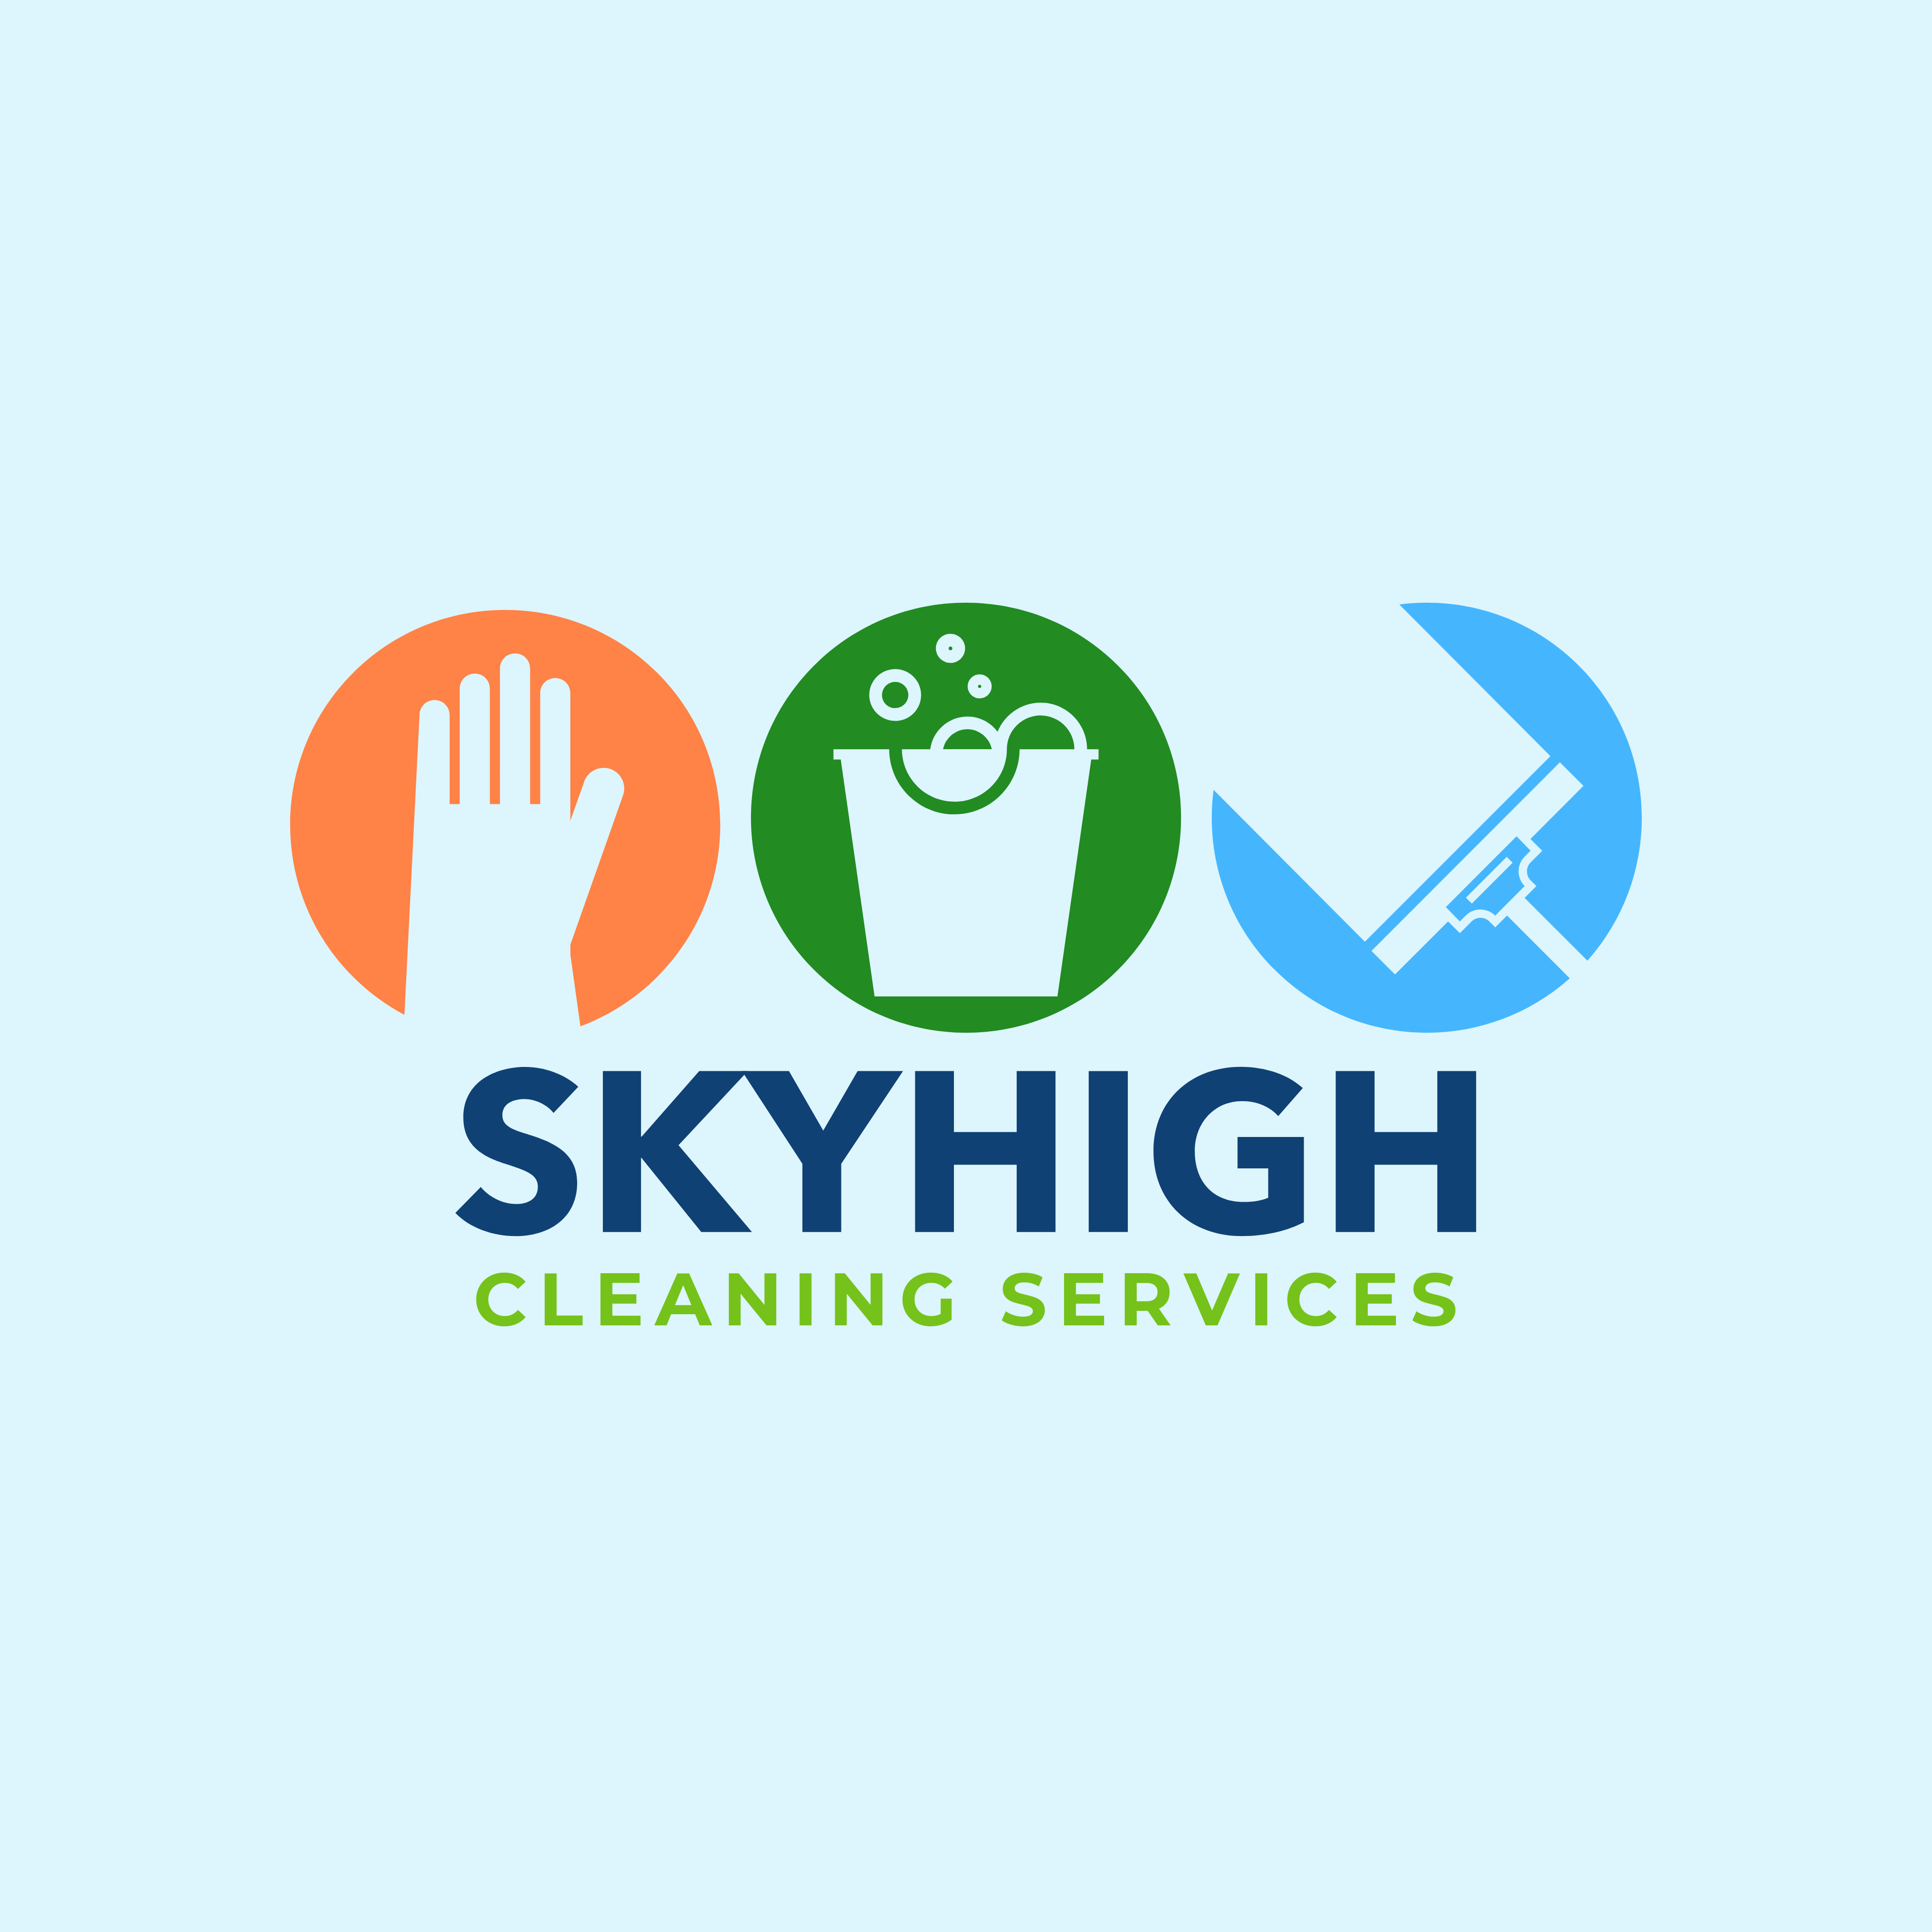 Skyhigh Cleaning Services provider